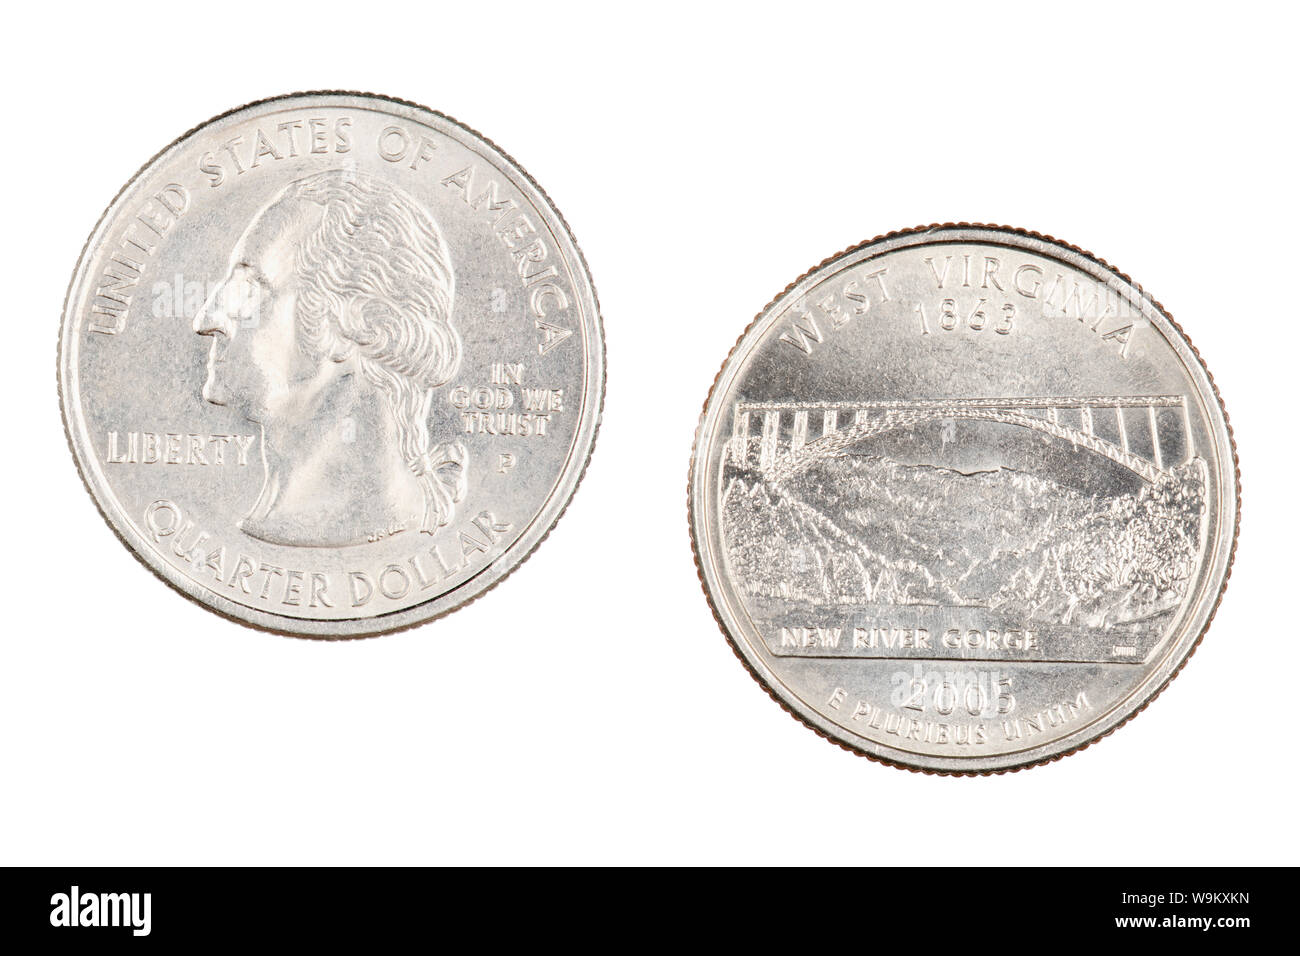 Obverse and reverse sides of the West Virginia 2005p State Commemorative Quarter isolated on a white background Stock Photo